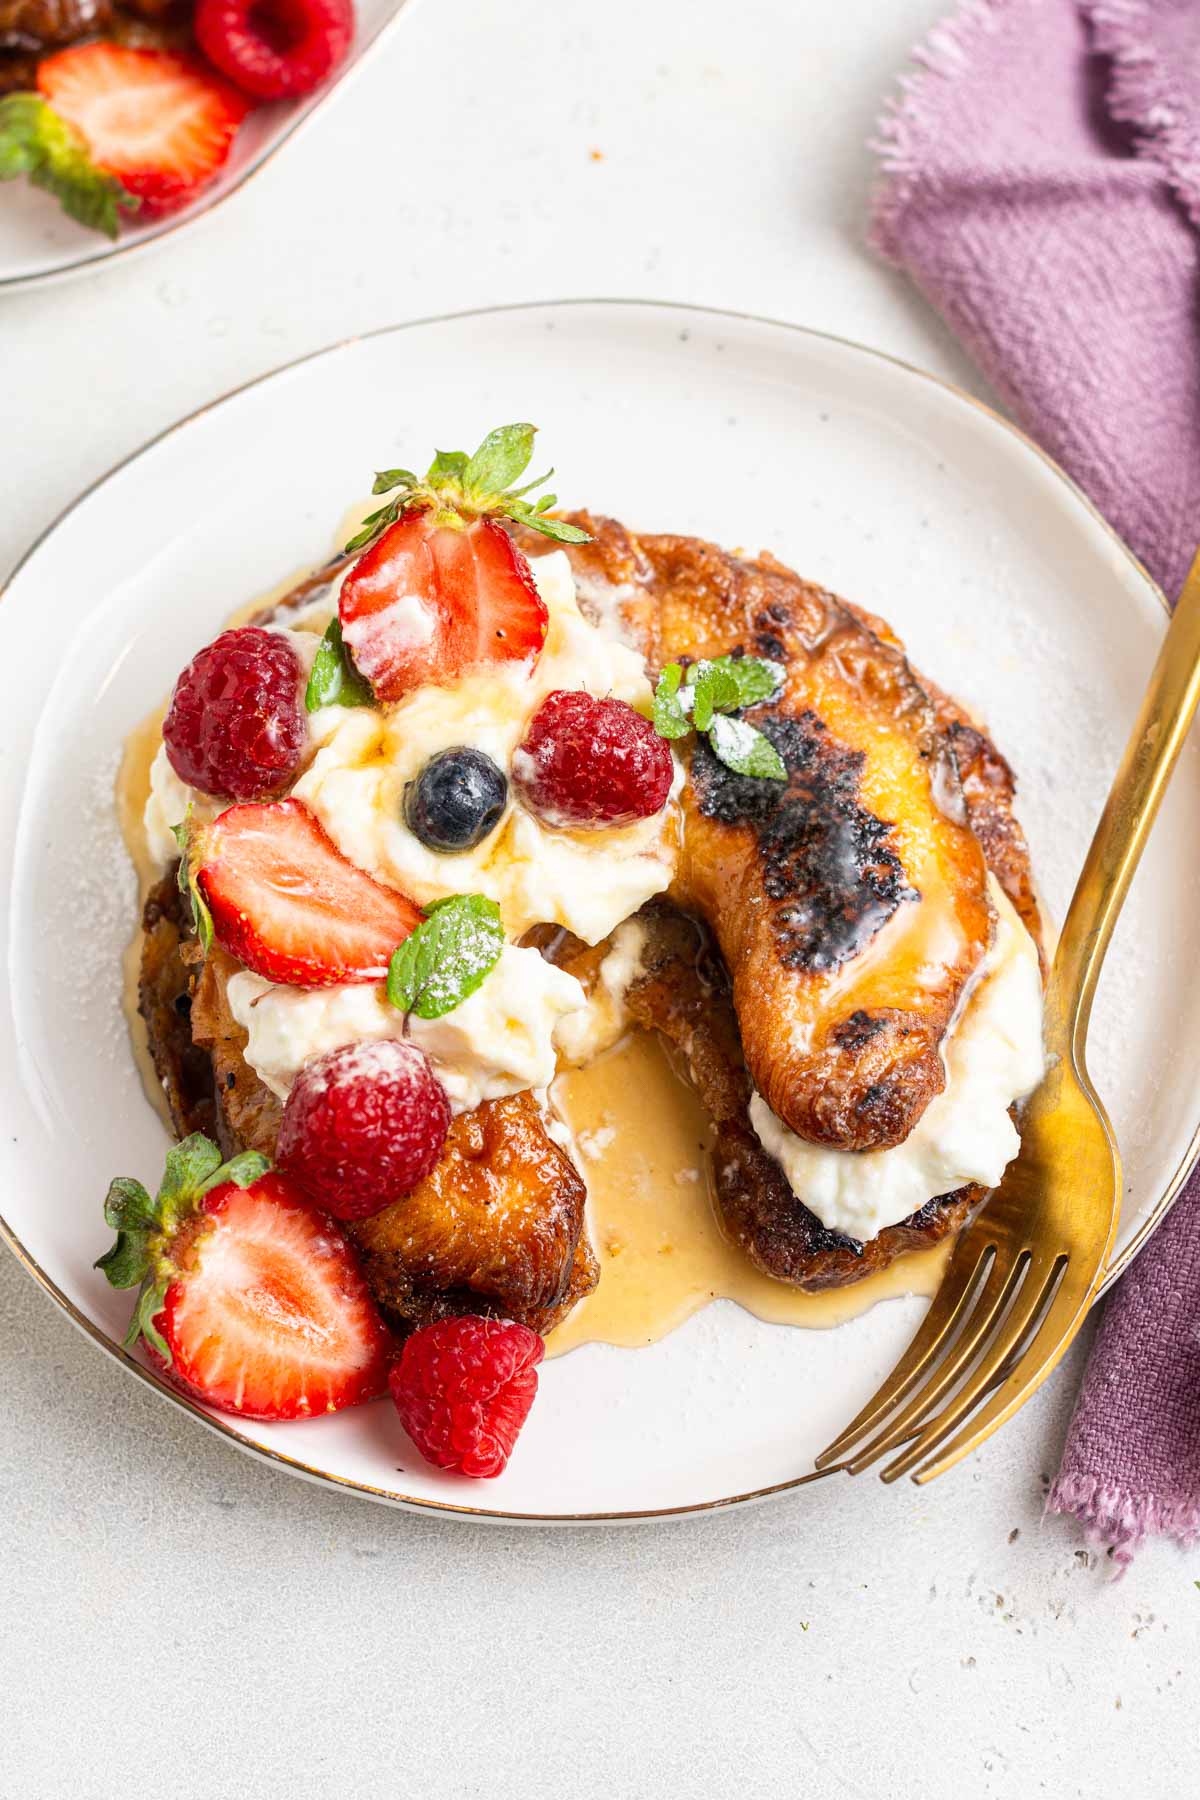 Croissant French toast on plate with berries and cream.